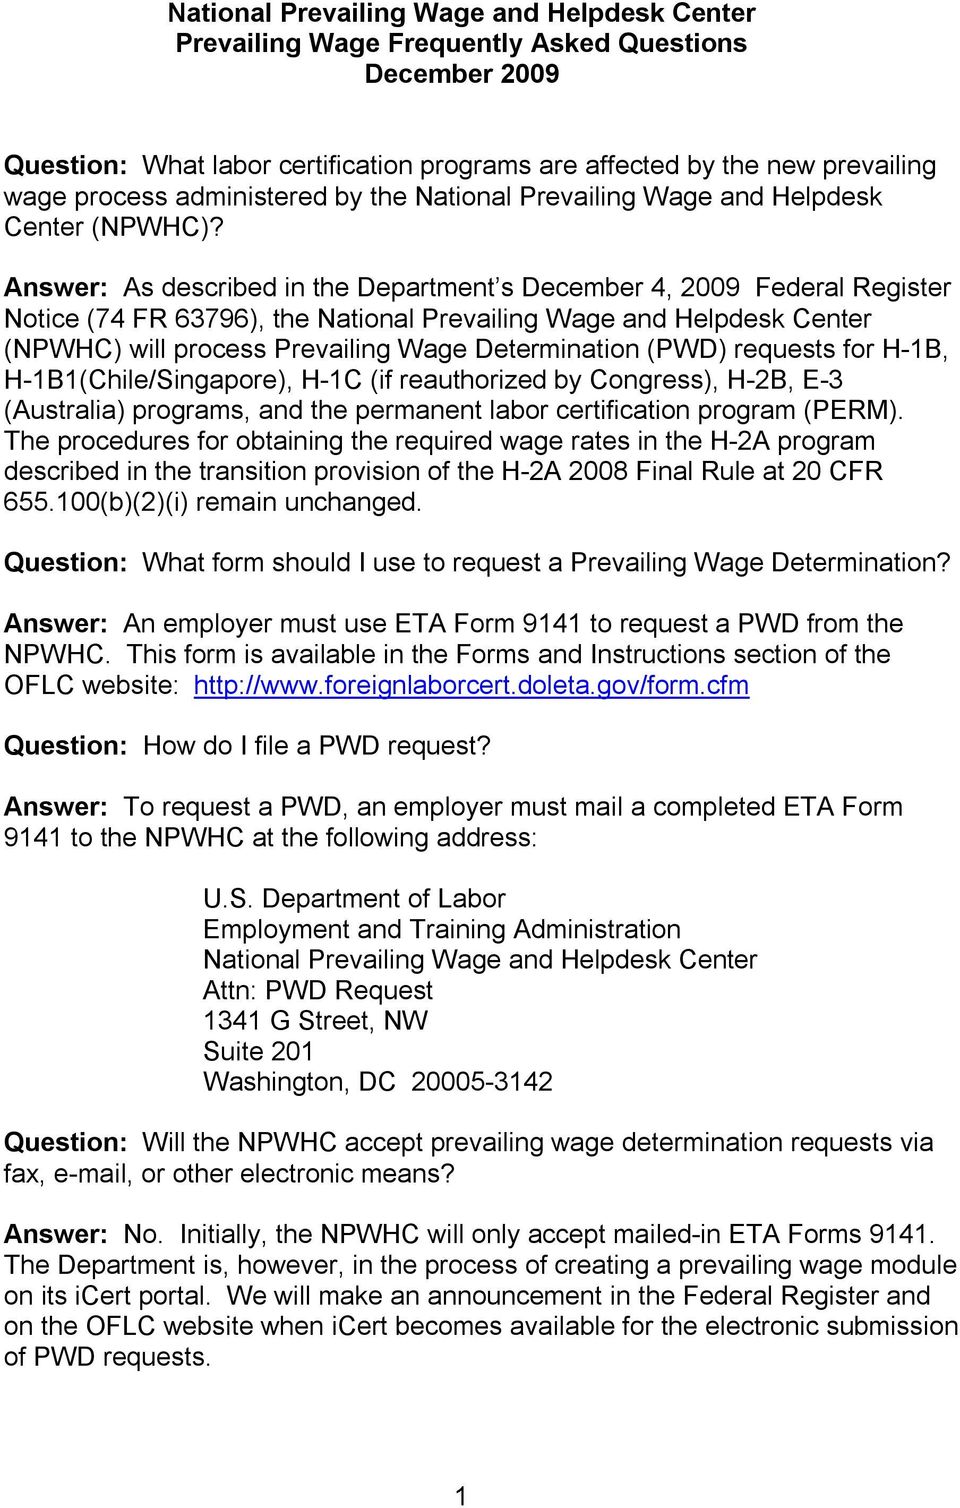 Answer: As described in the Department s December 4, 2009 Federal Register Notice (74 FR 63796), the National Prevailing Wage and Helpdesk Center (NPWHC) will process Prevailing Wage Determination